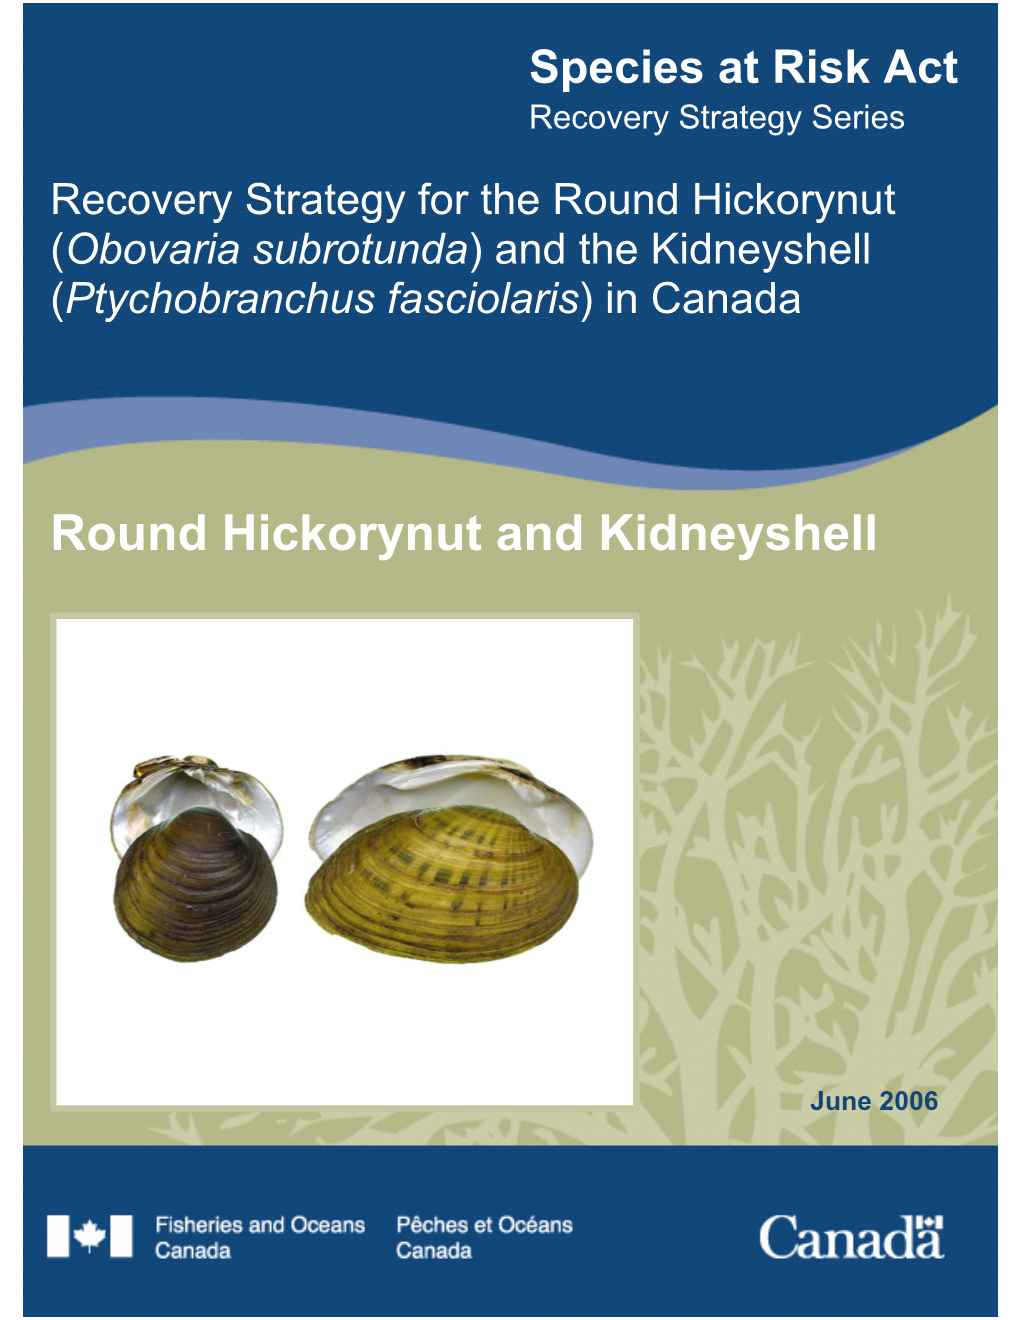 Recovery Strategy for the Round Hickorynut (Obovaria Subrotunda) and the Kidneyshell (Ptychobranchus Fasciolaris) in Canada